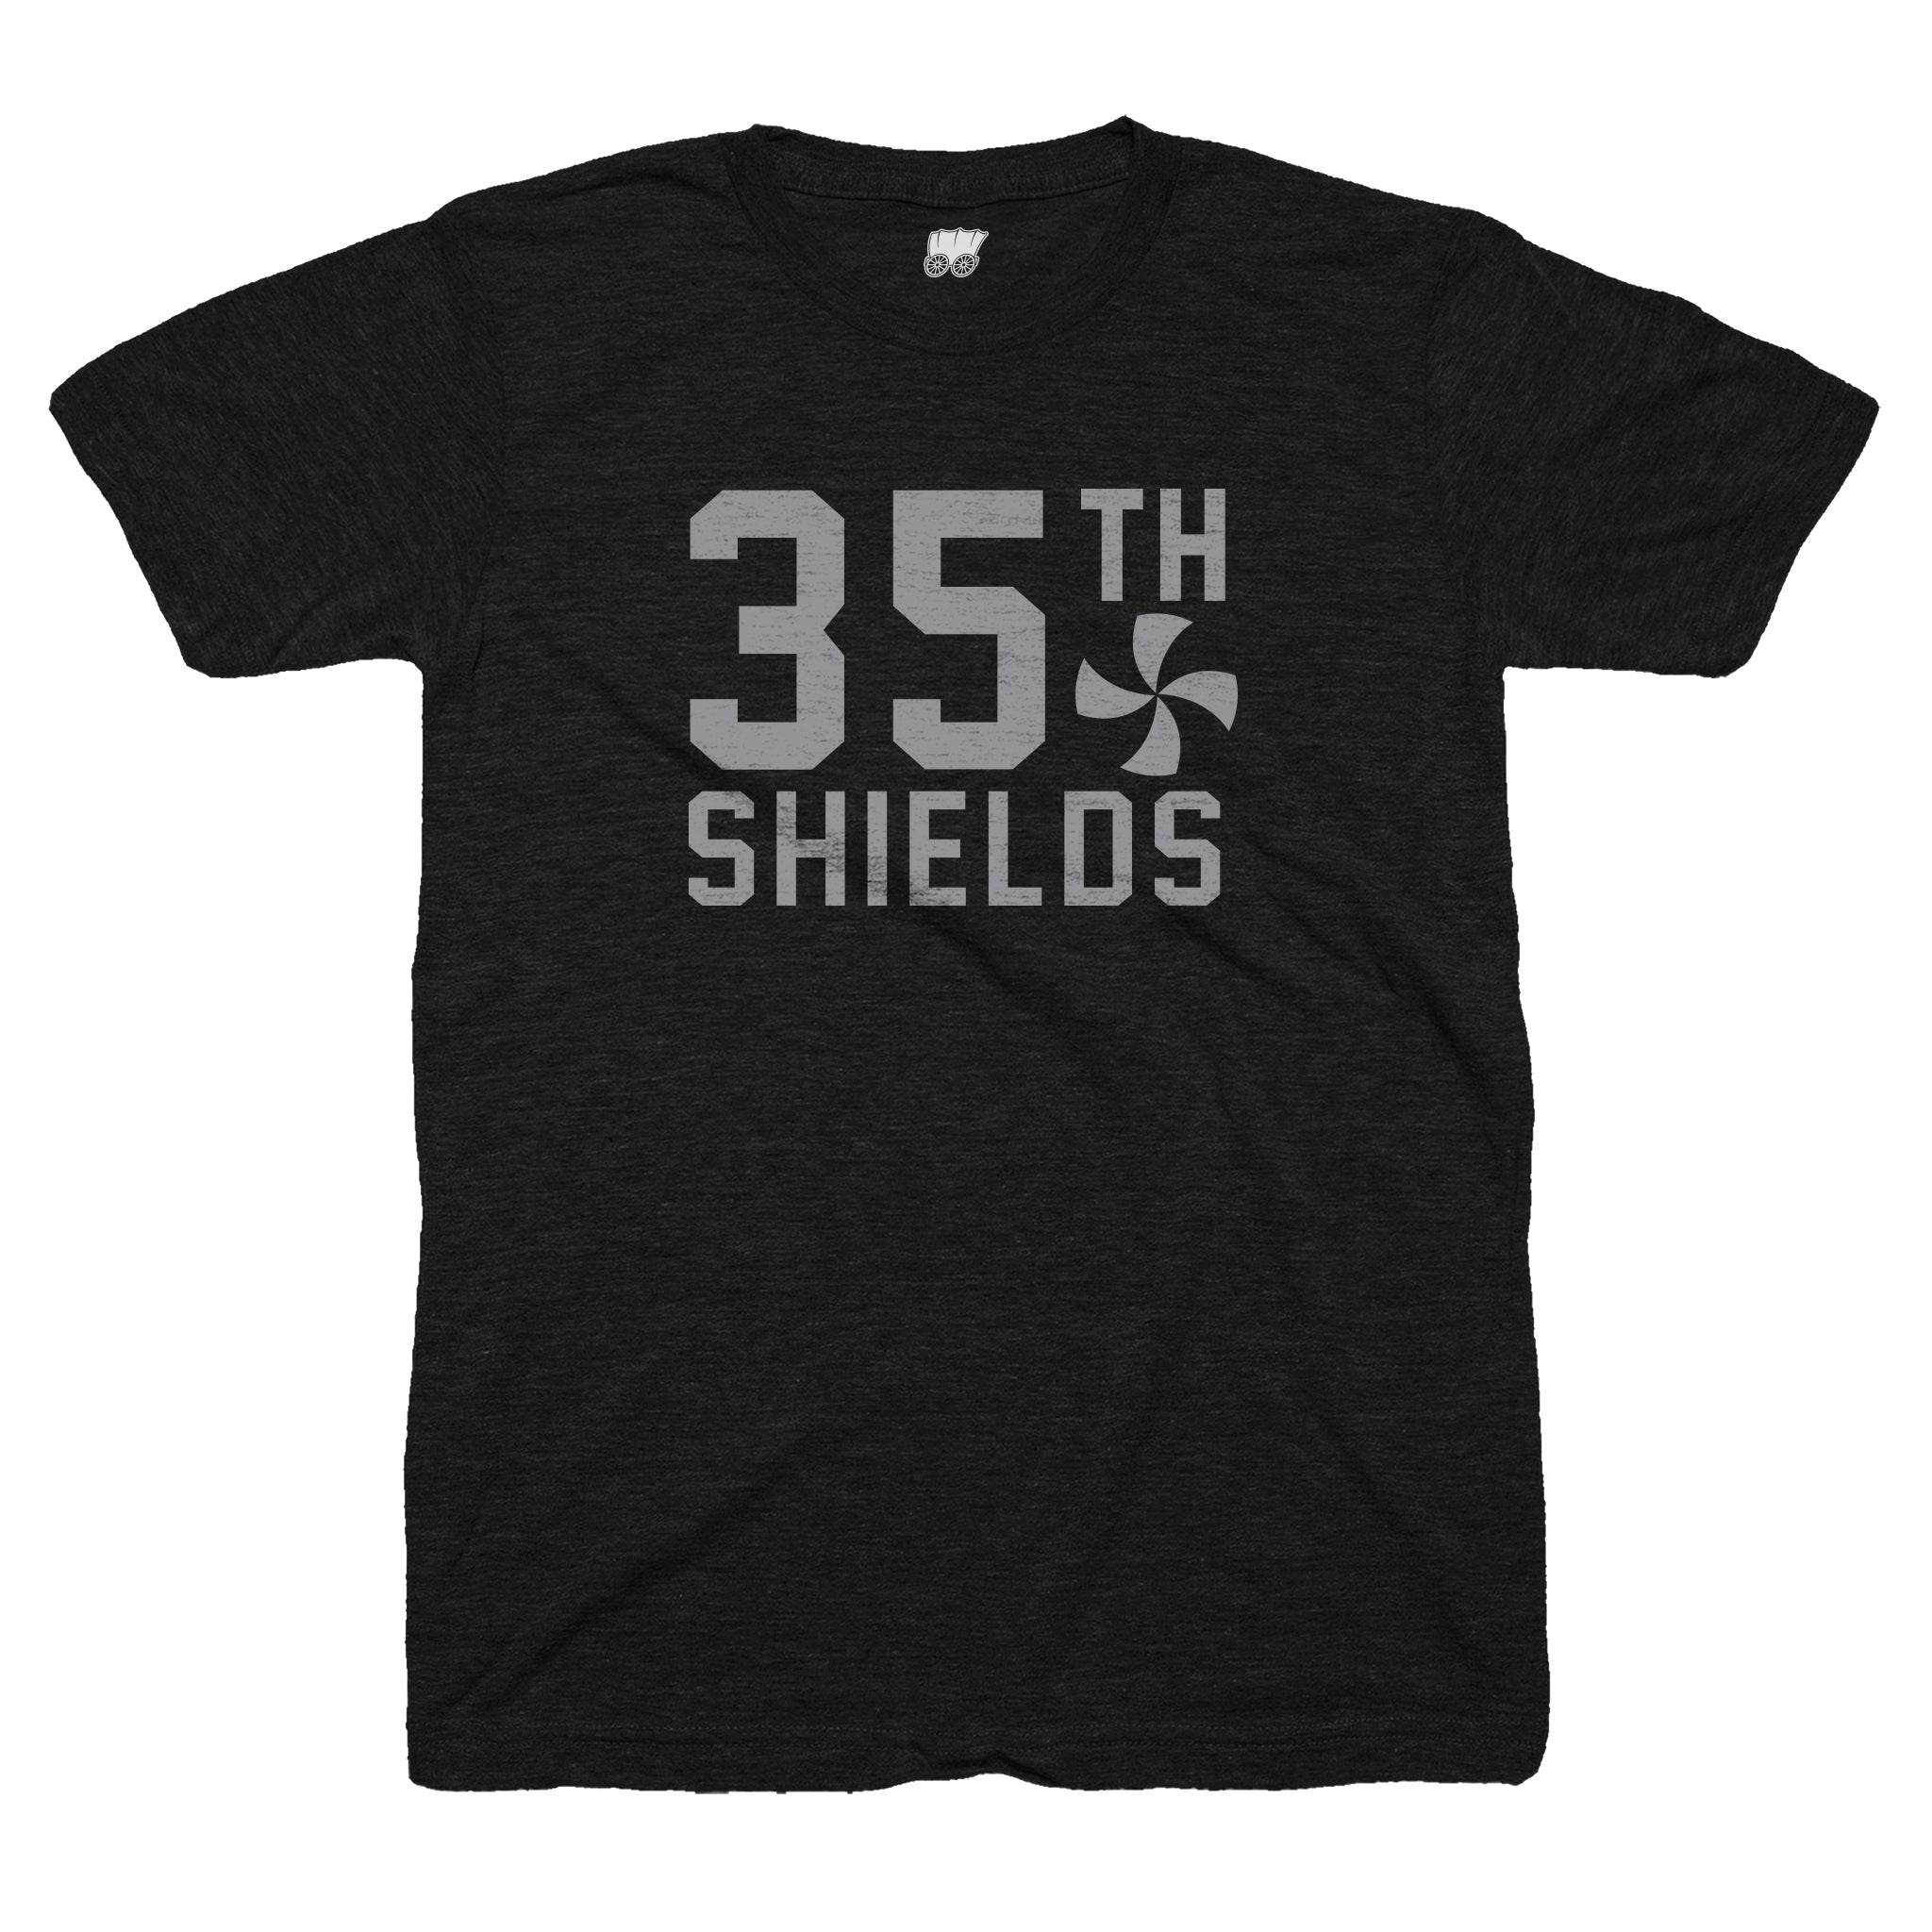 35th and Shields gear, South Side Chicago tshirt